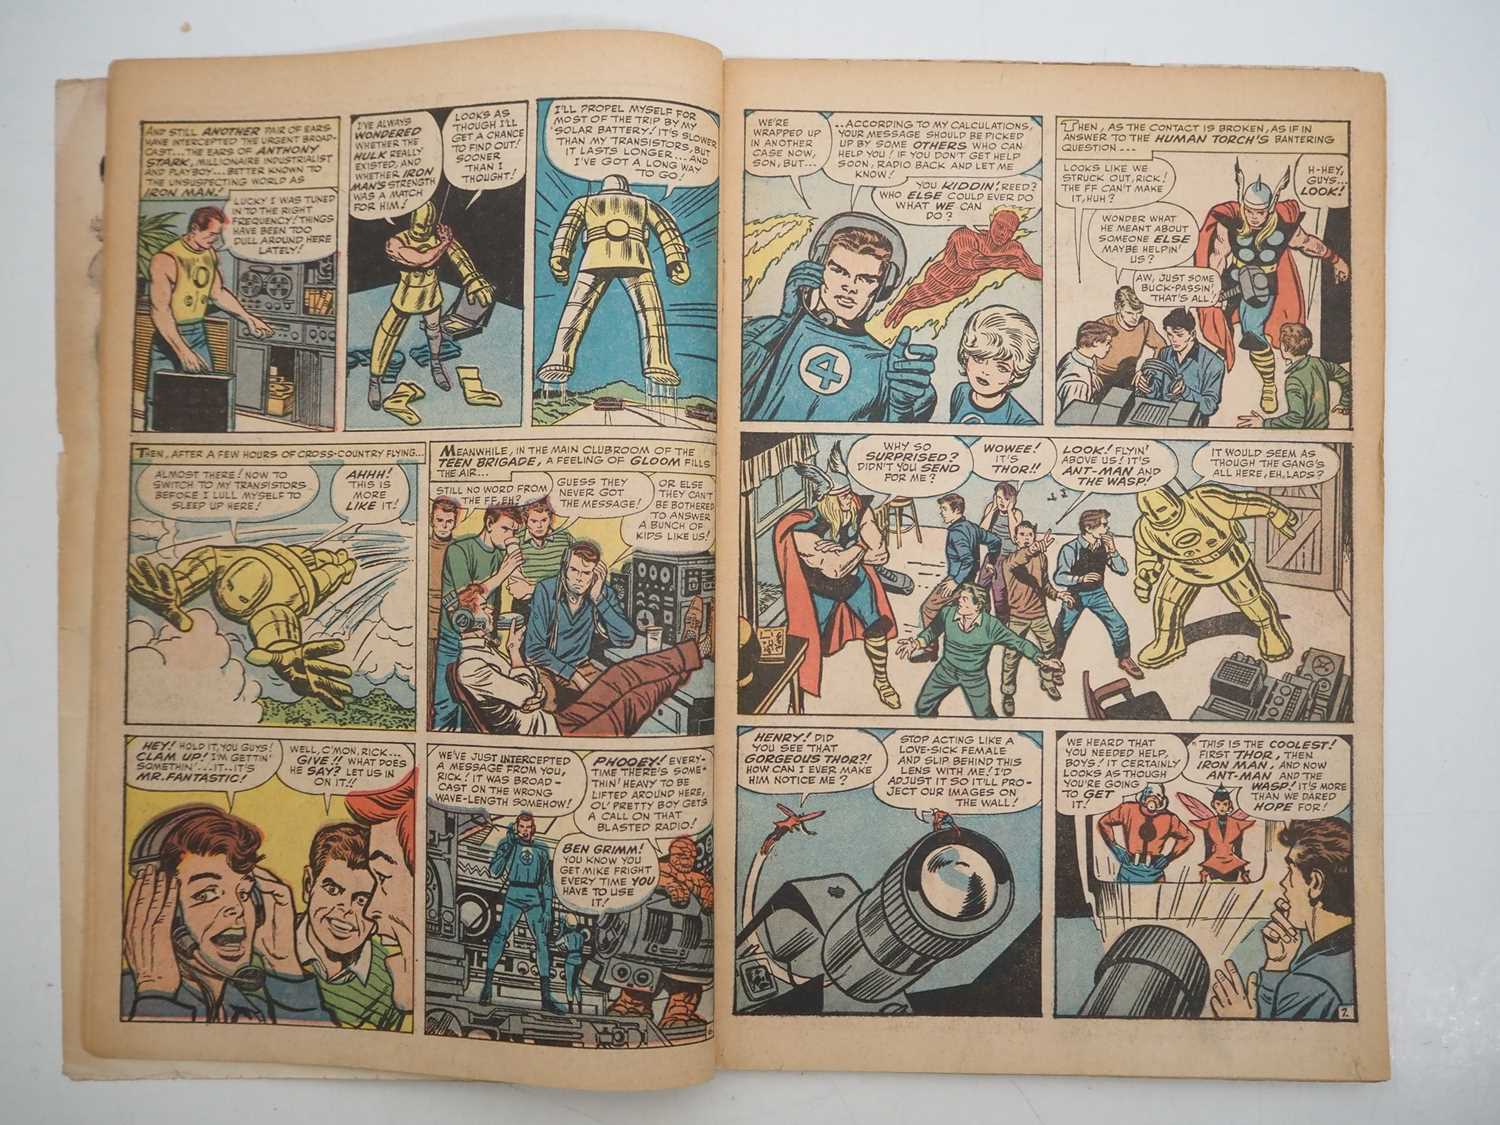 AVENGERS #1 - (1963 - MARVEL - UK Price Variant) - KEY Comic Book - First appearance of the Avengers - Image 12 of 29